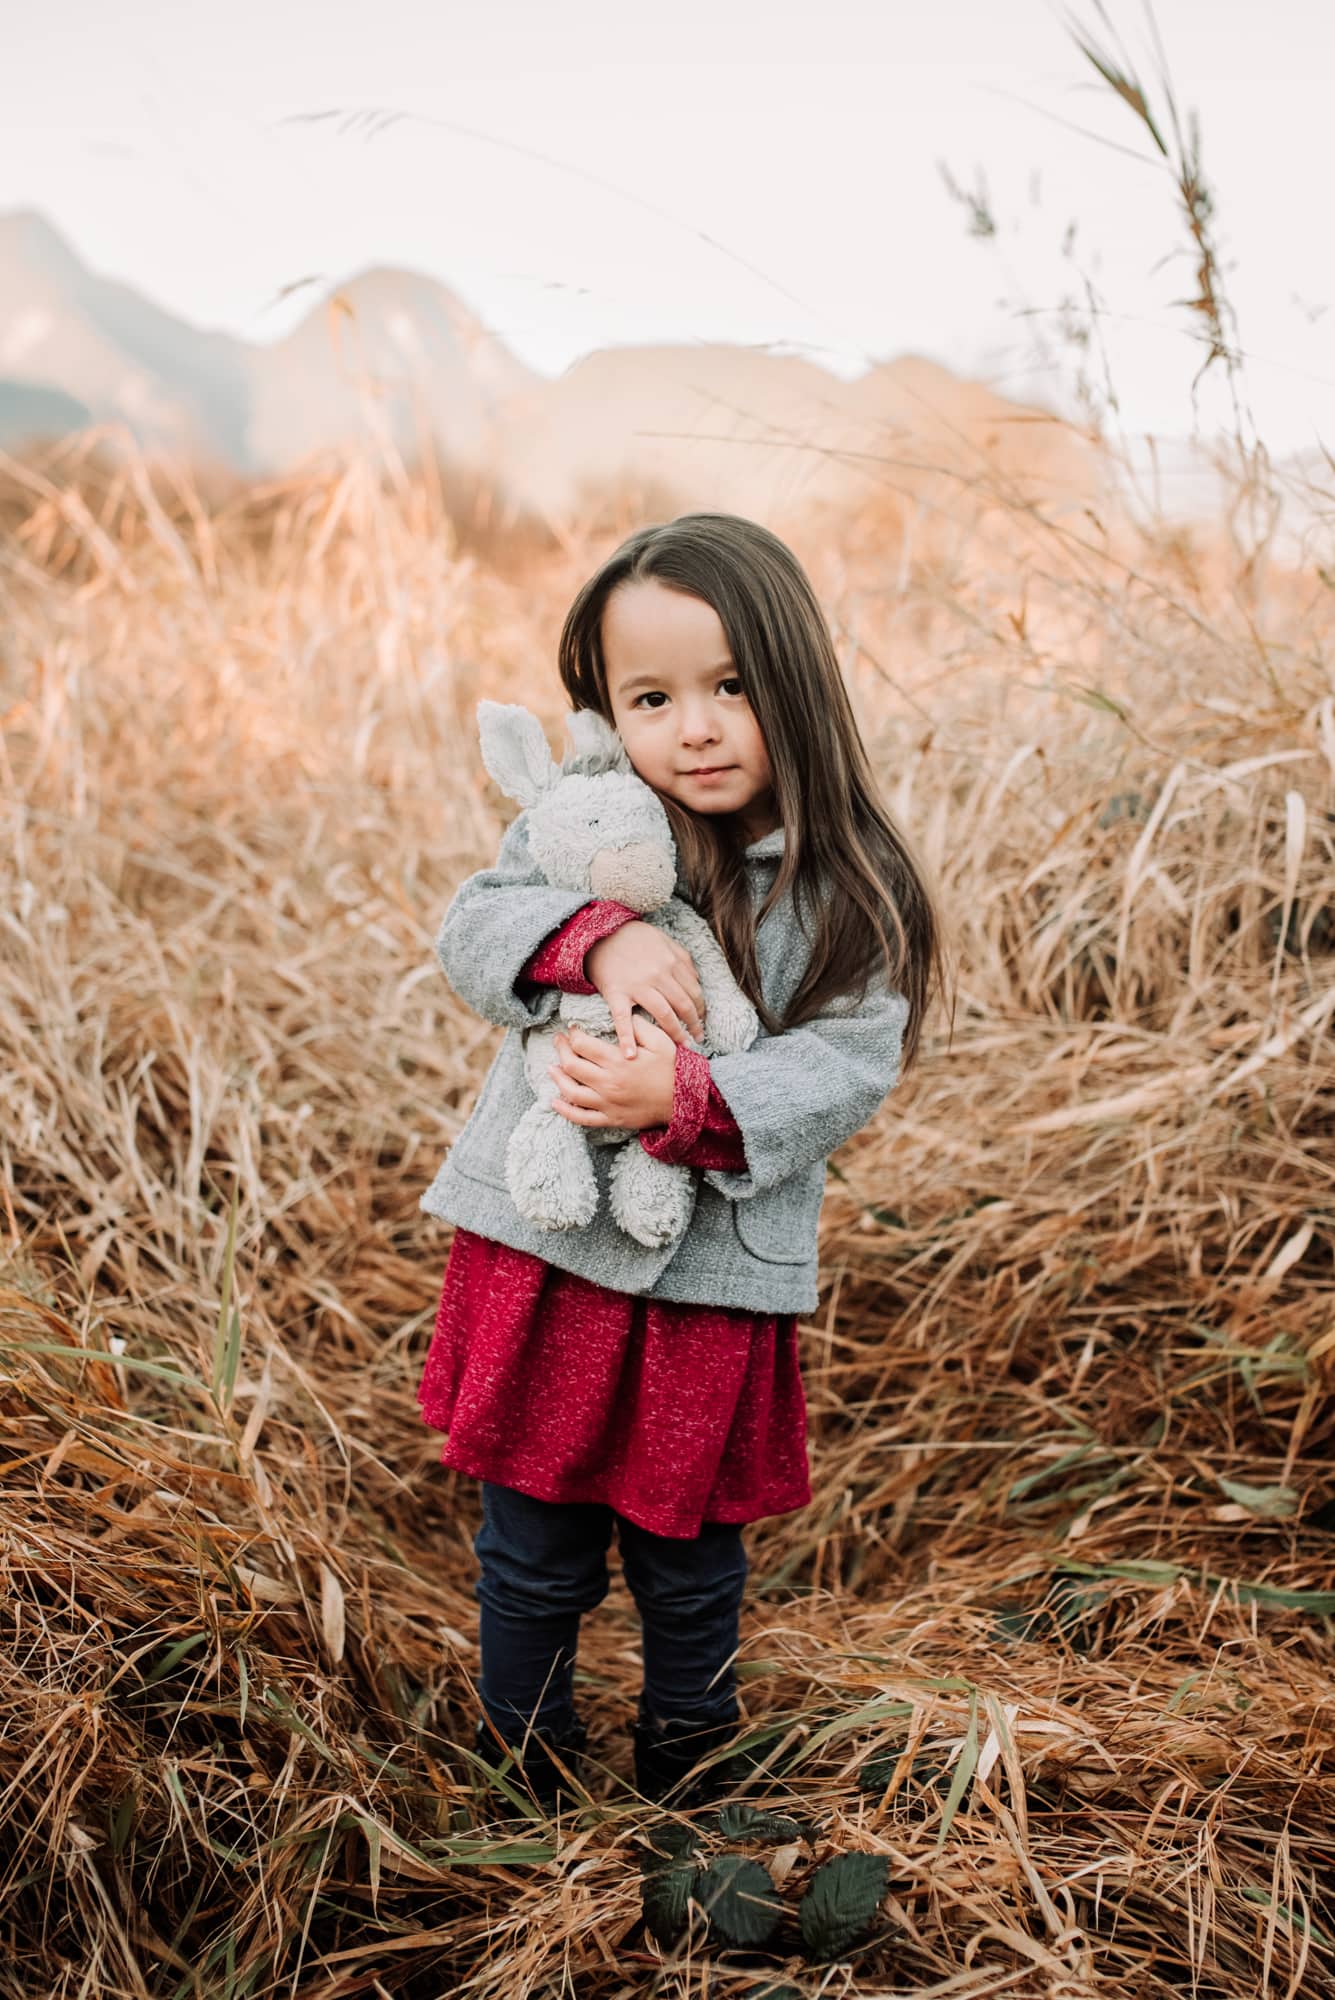 Vancouver Family Photographer shows girl holding teddy bear in reeds during family photo session